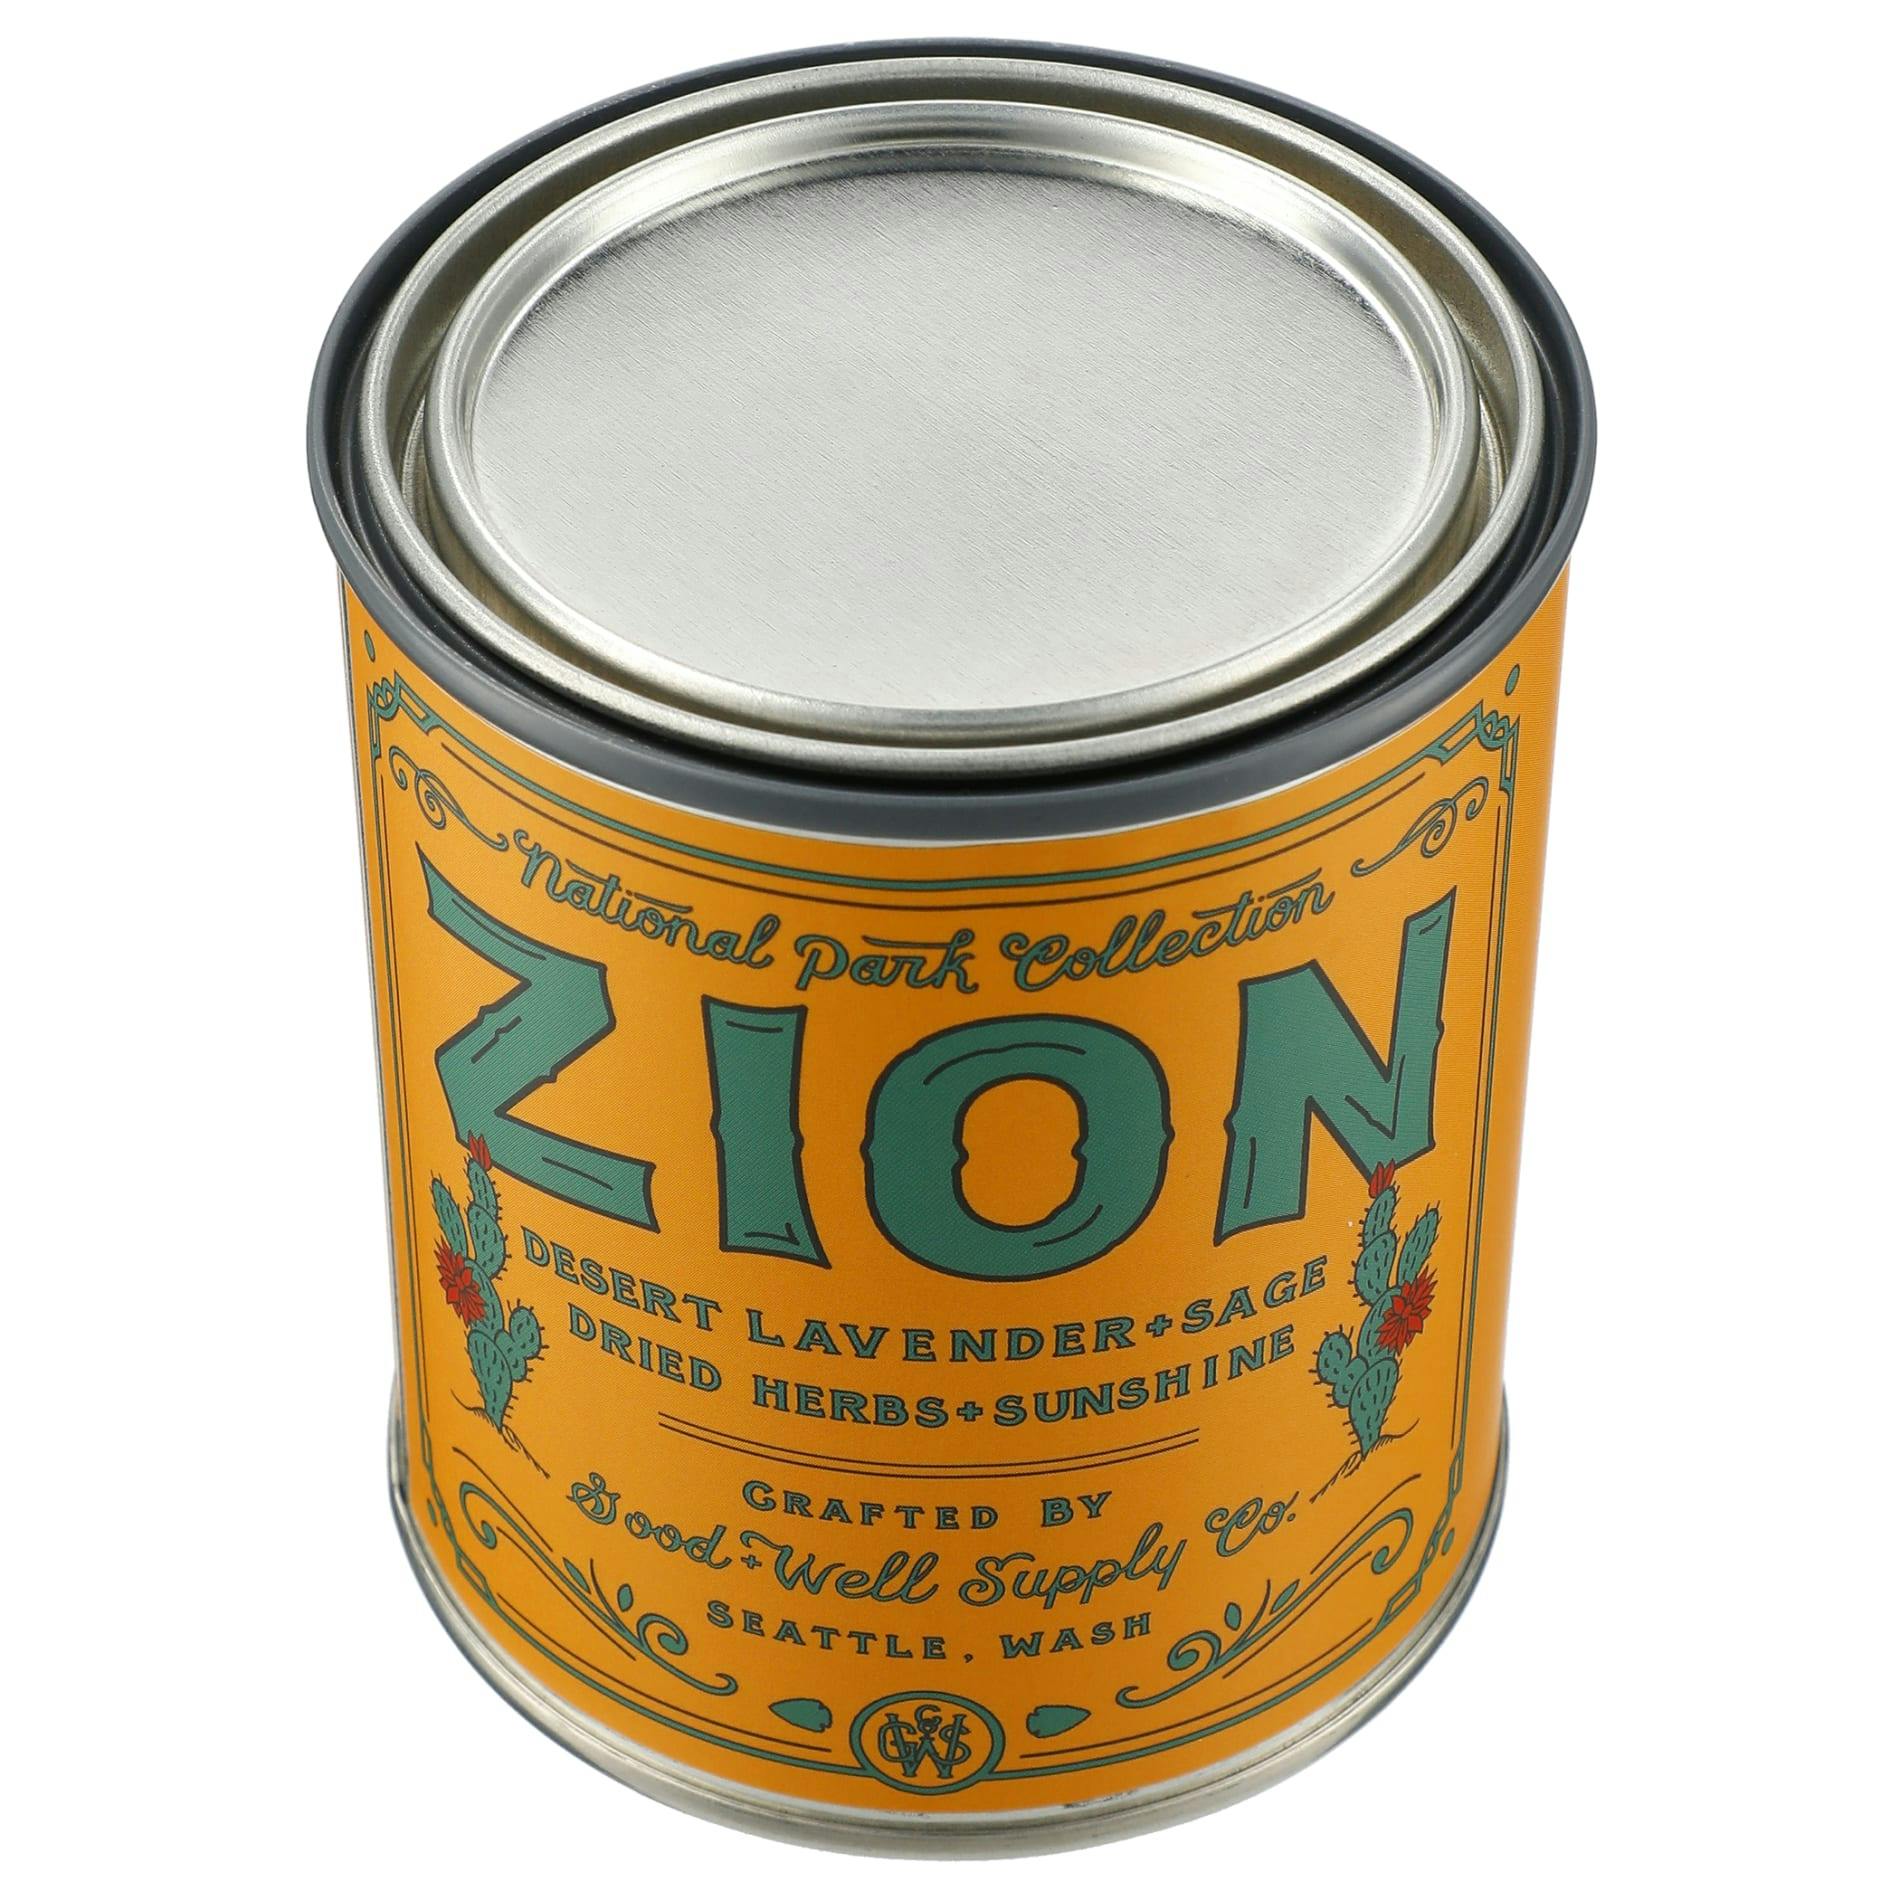 Zion National Park 14 oz Candle - additional Image 2